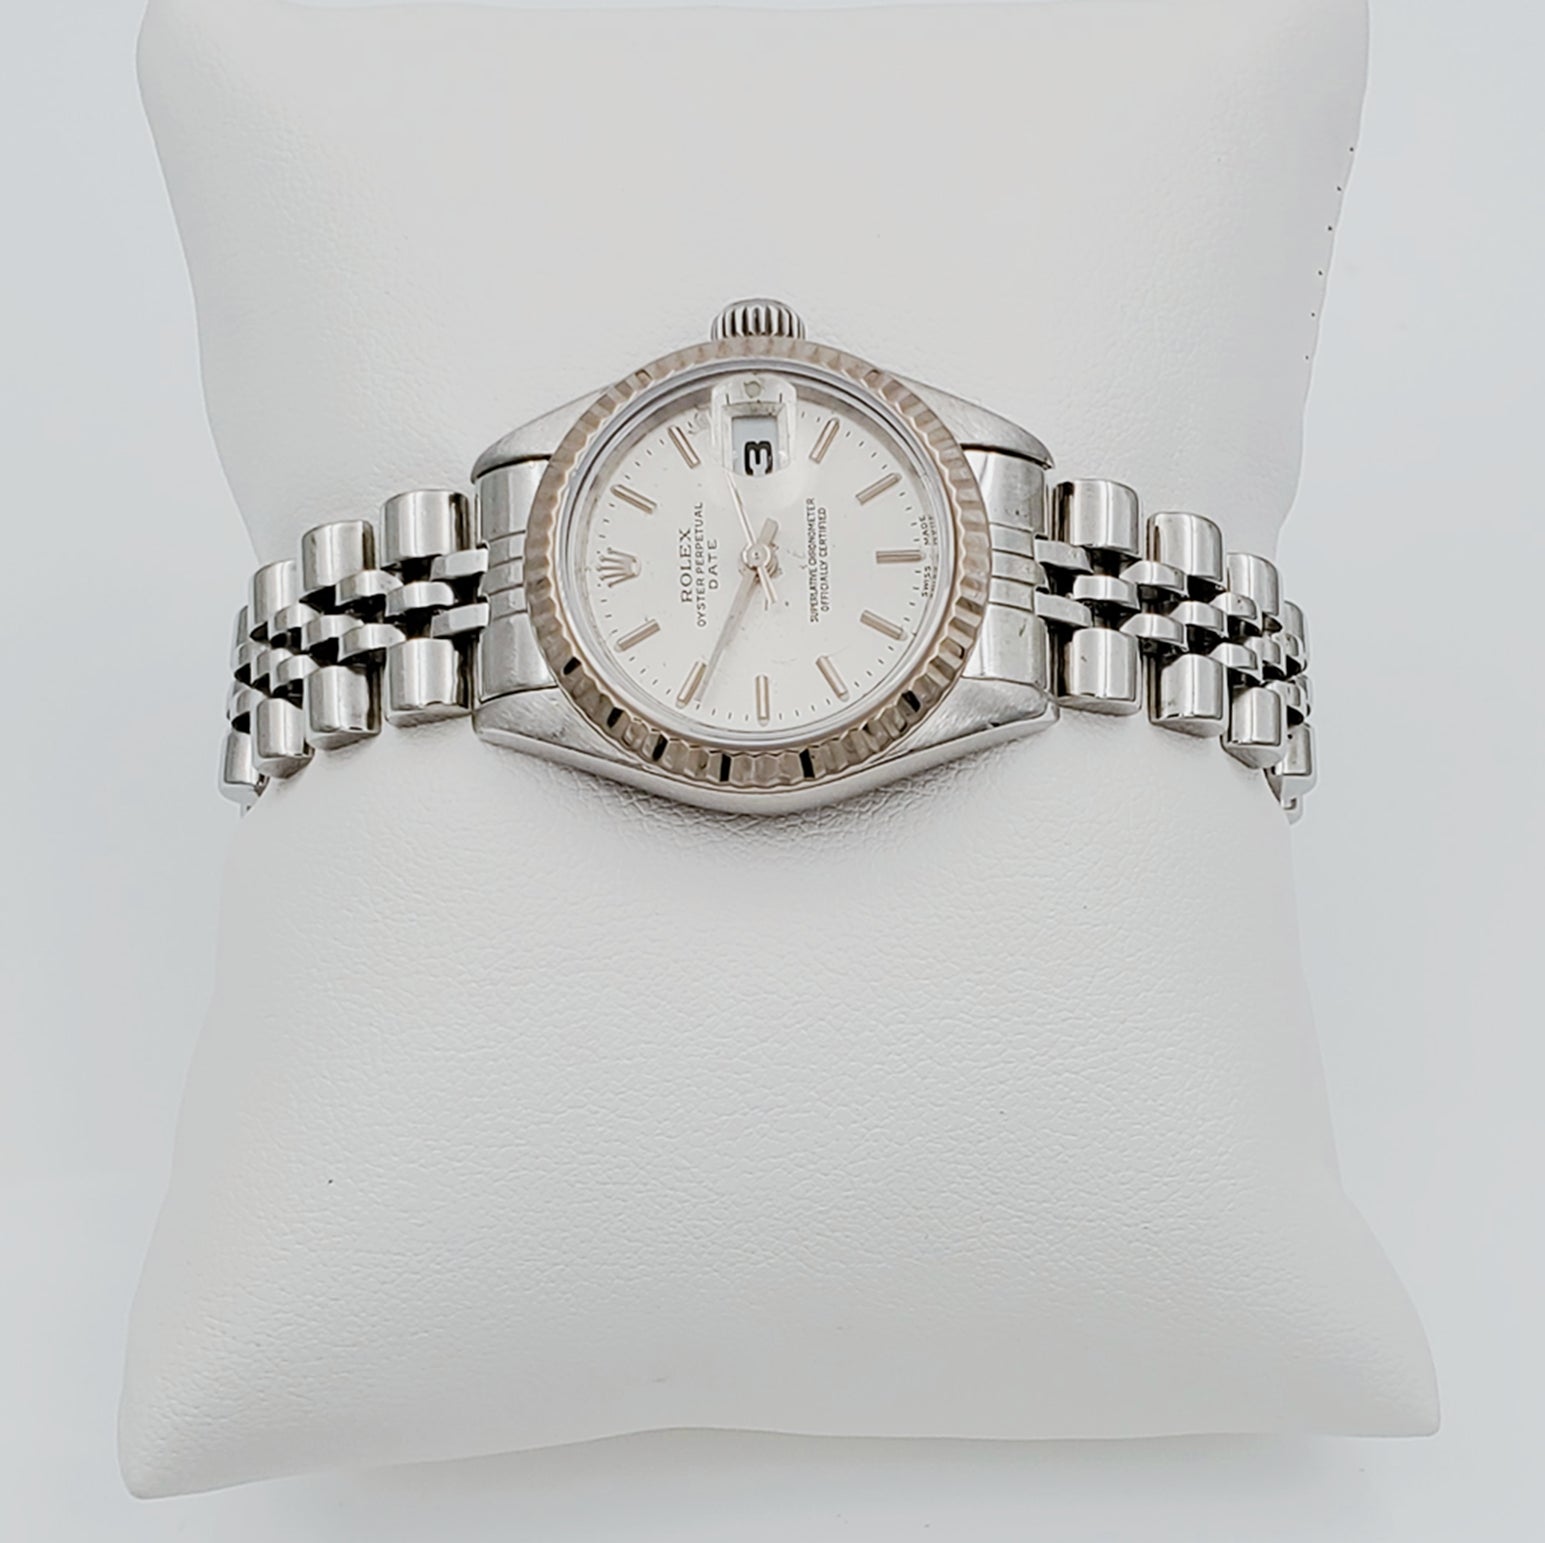 Ladies Rolex 26mm DateJust 18K White Gold / Stainless Steel Watch with Silver Dial and Fluted Bezel. (Pre-Owned)